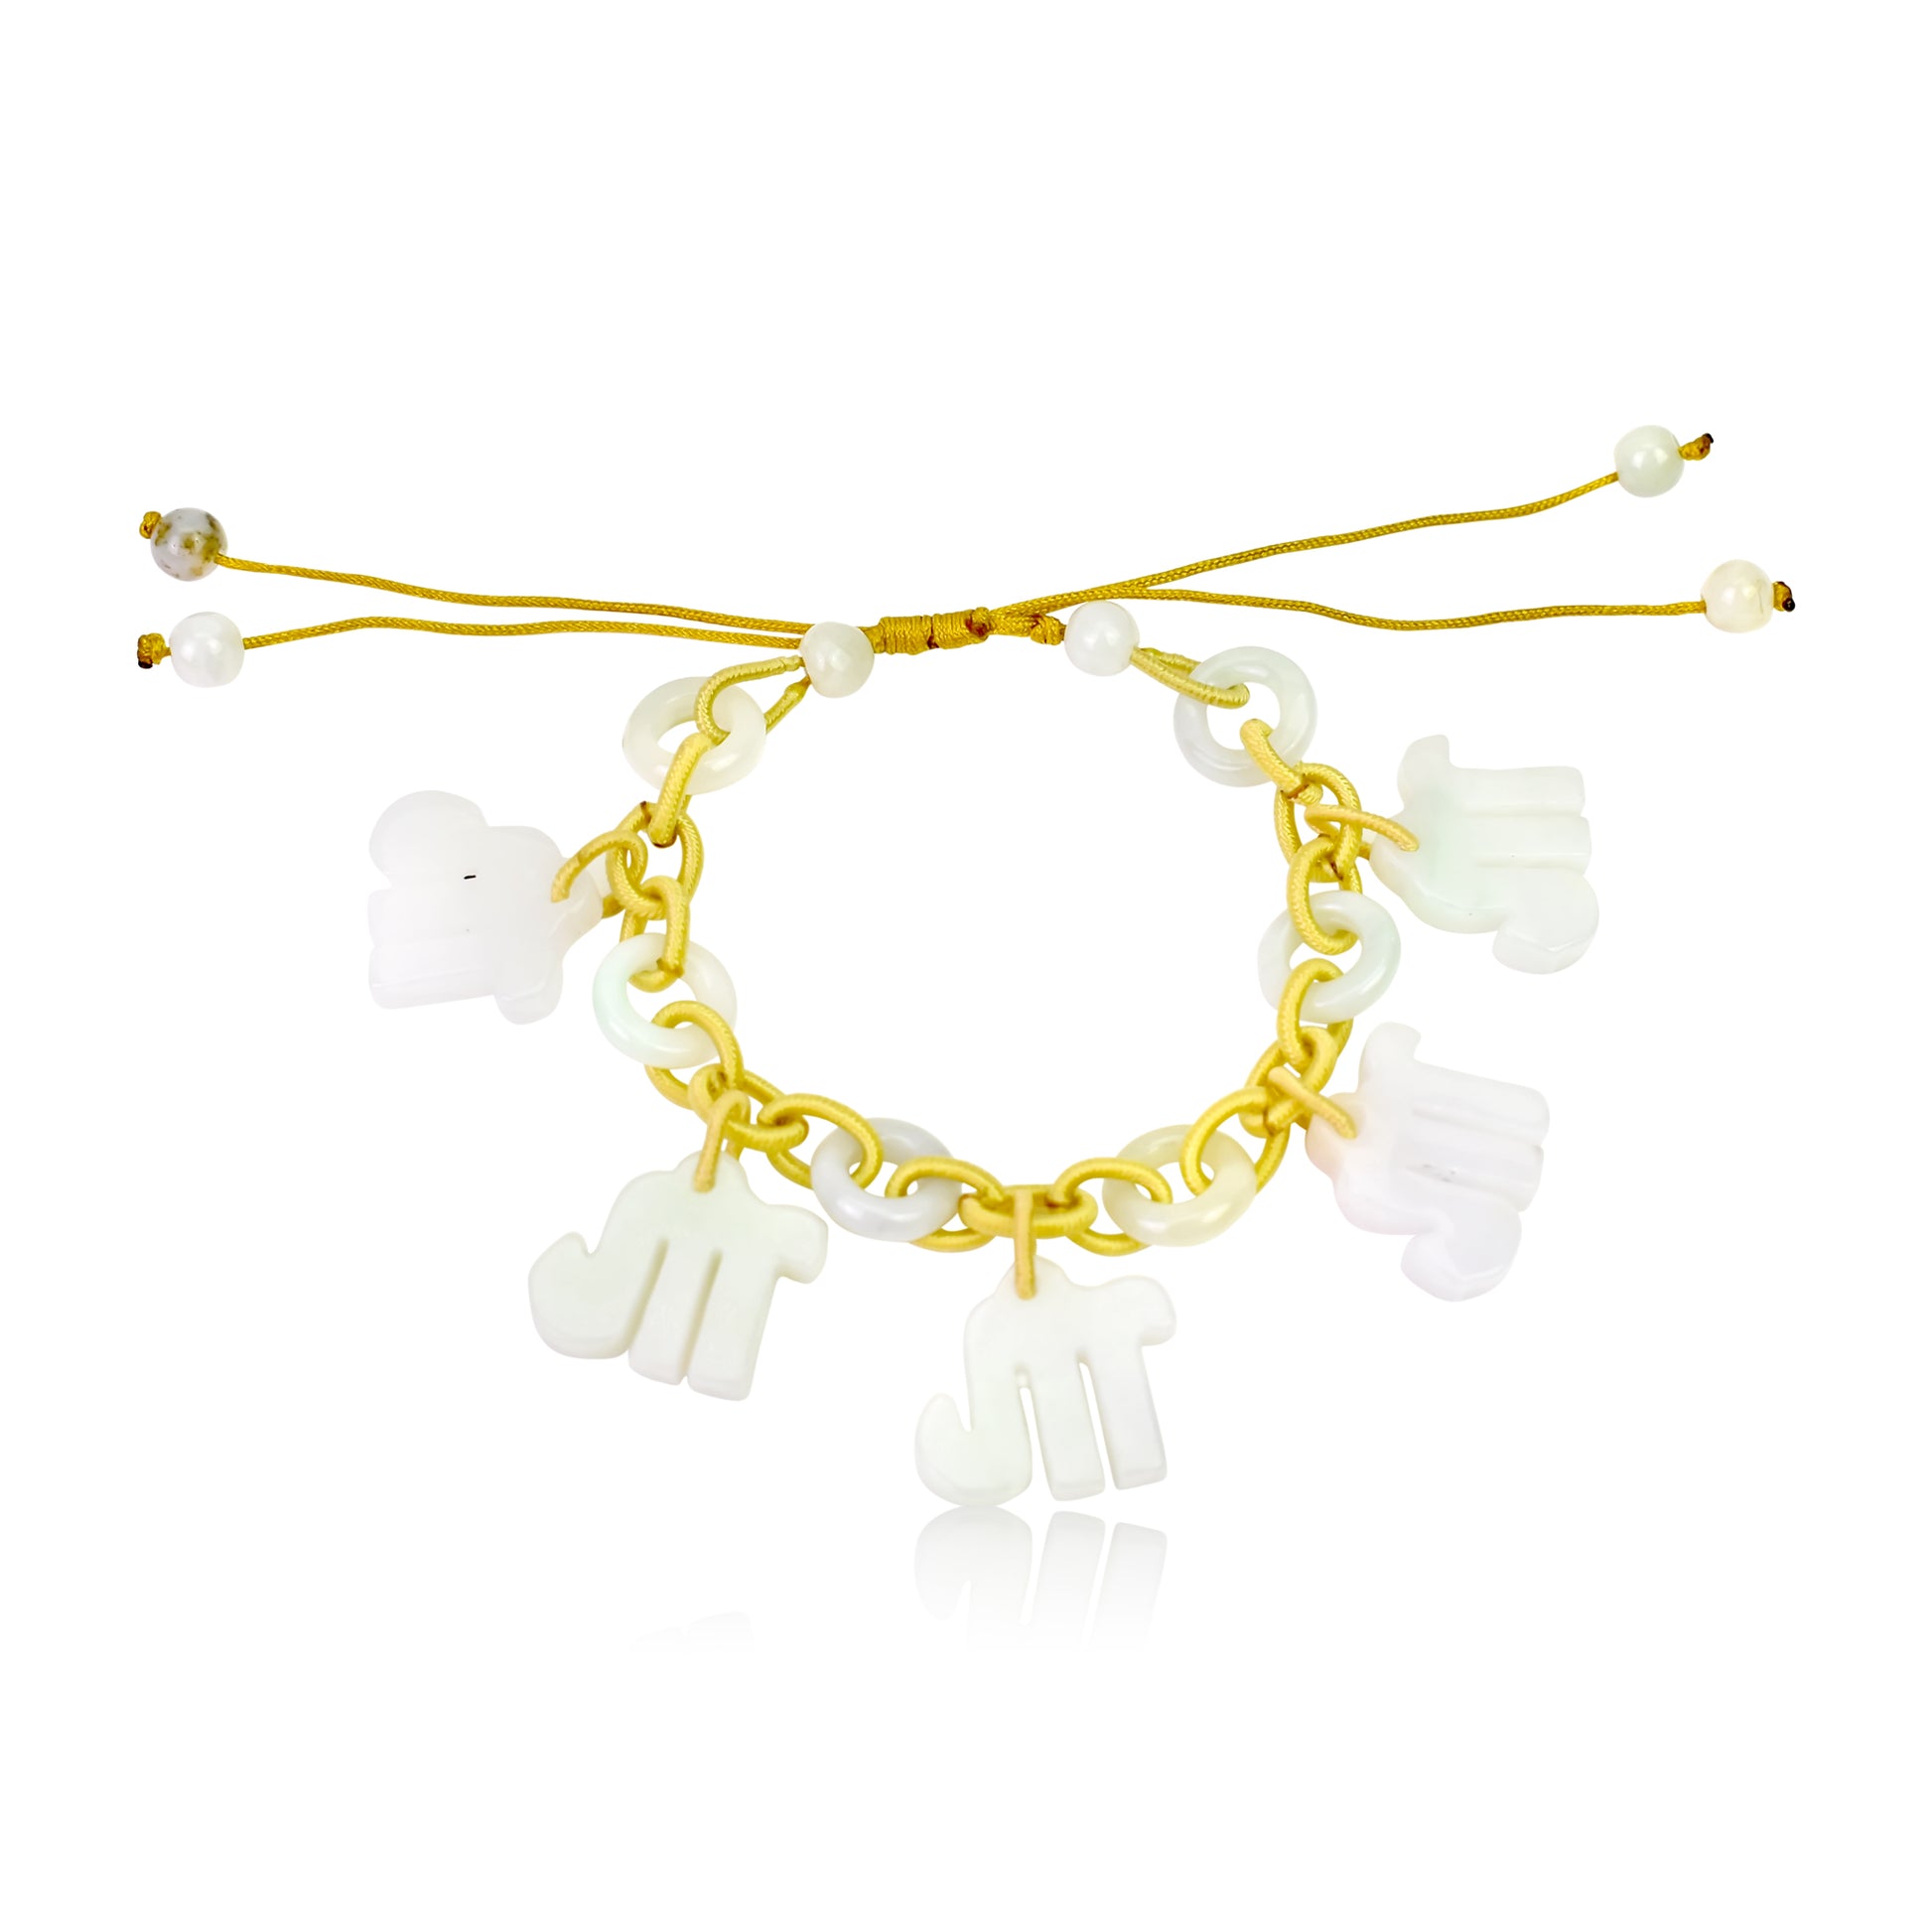 Celebrate Your Scorpio Personality with a Jade Bracelet made with Yellow Cord